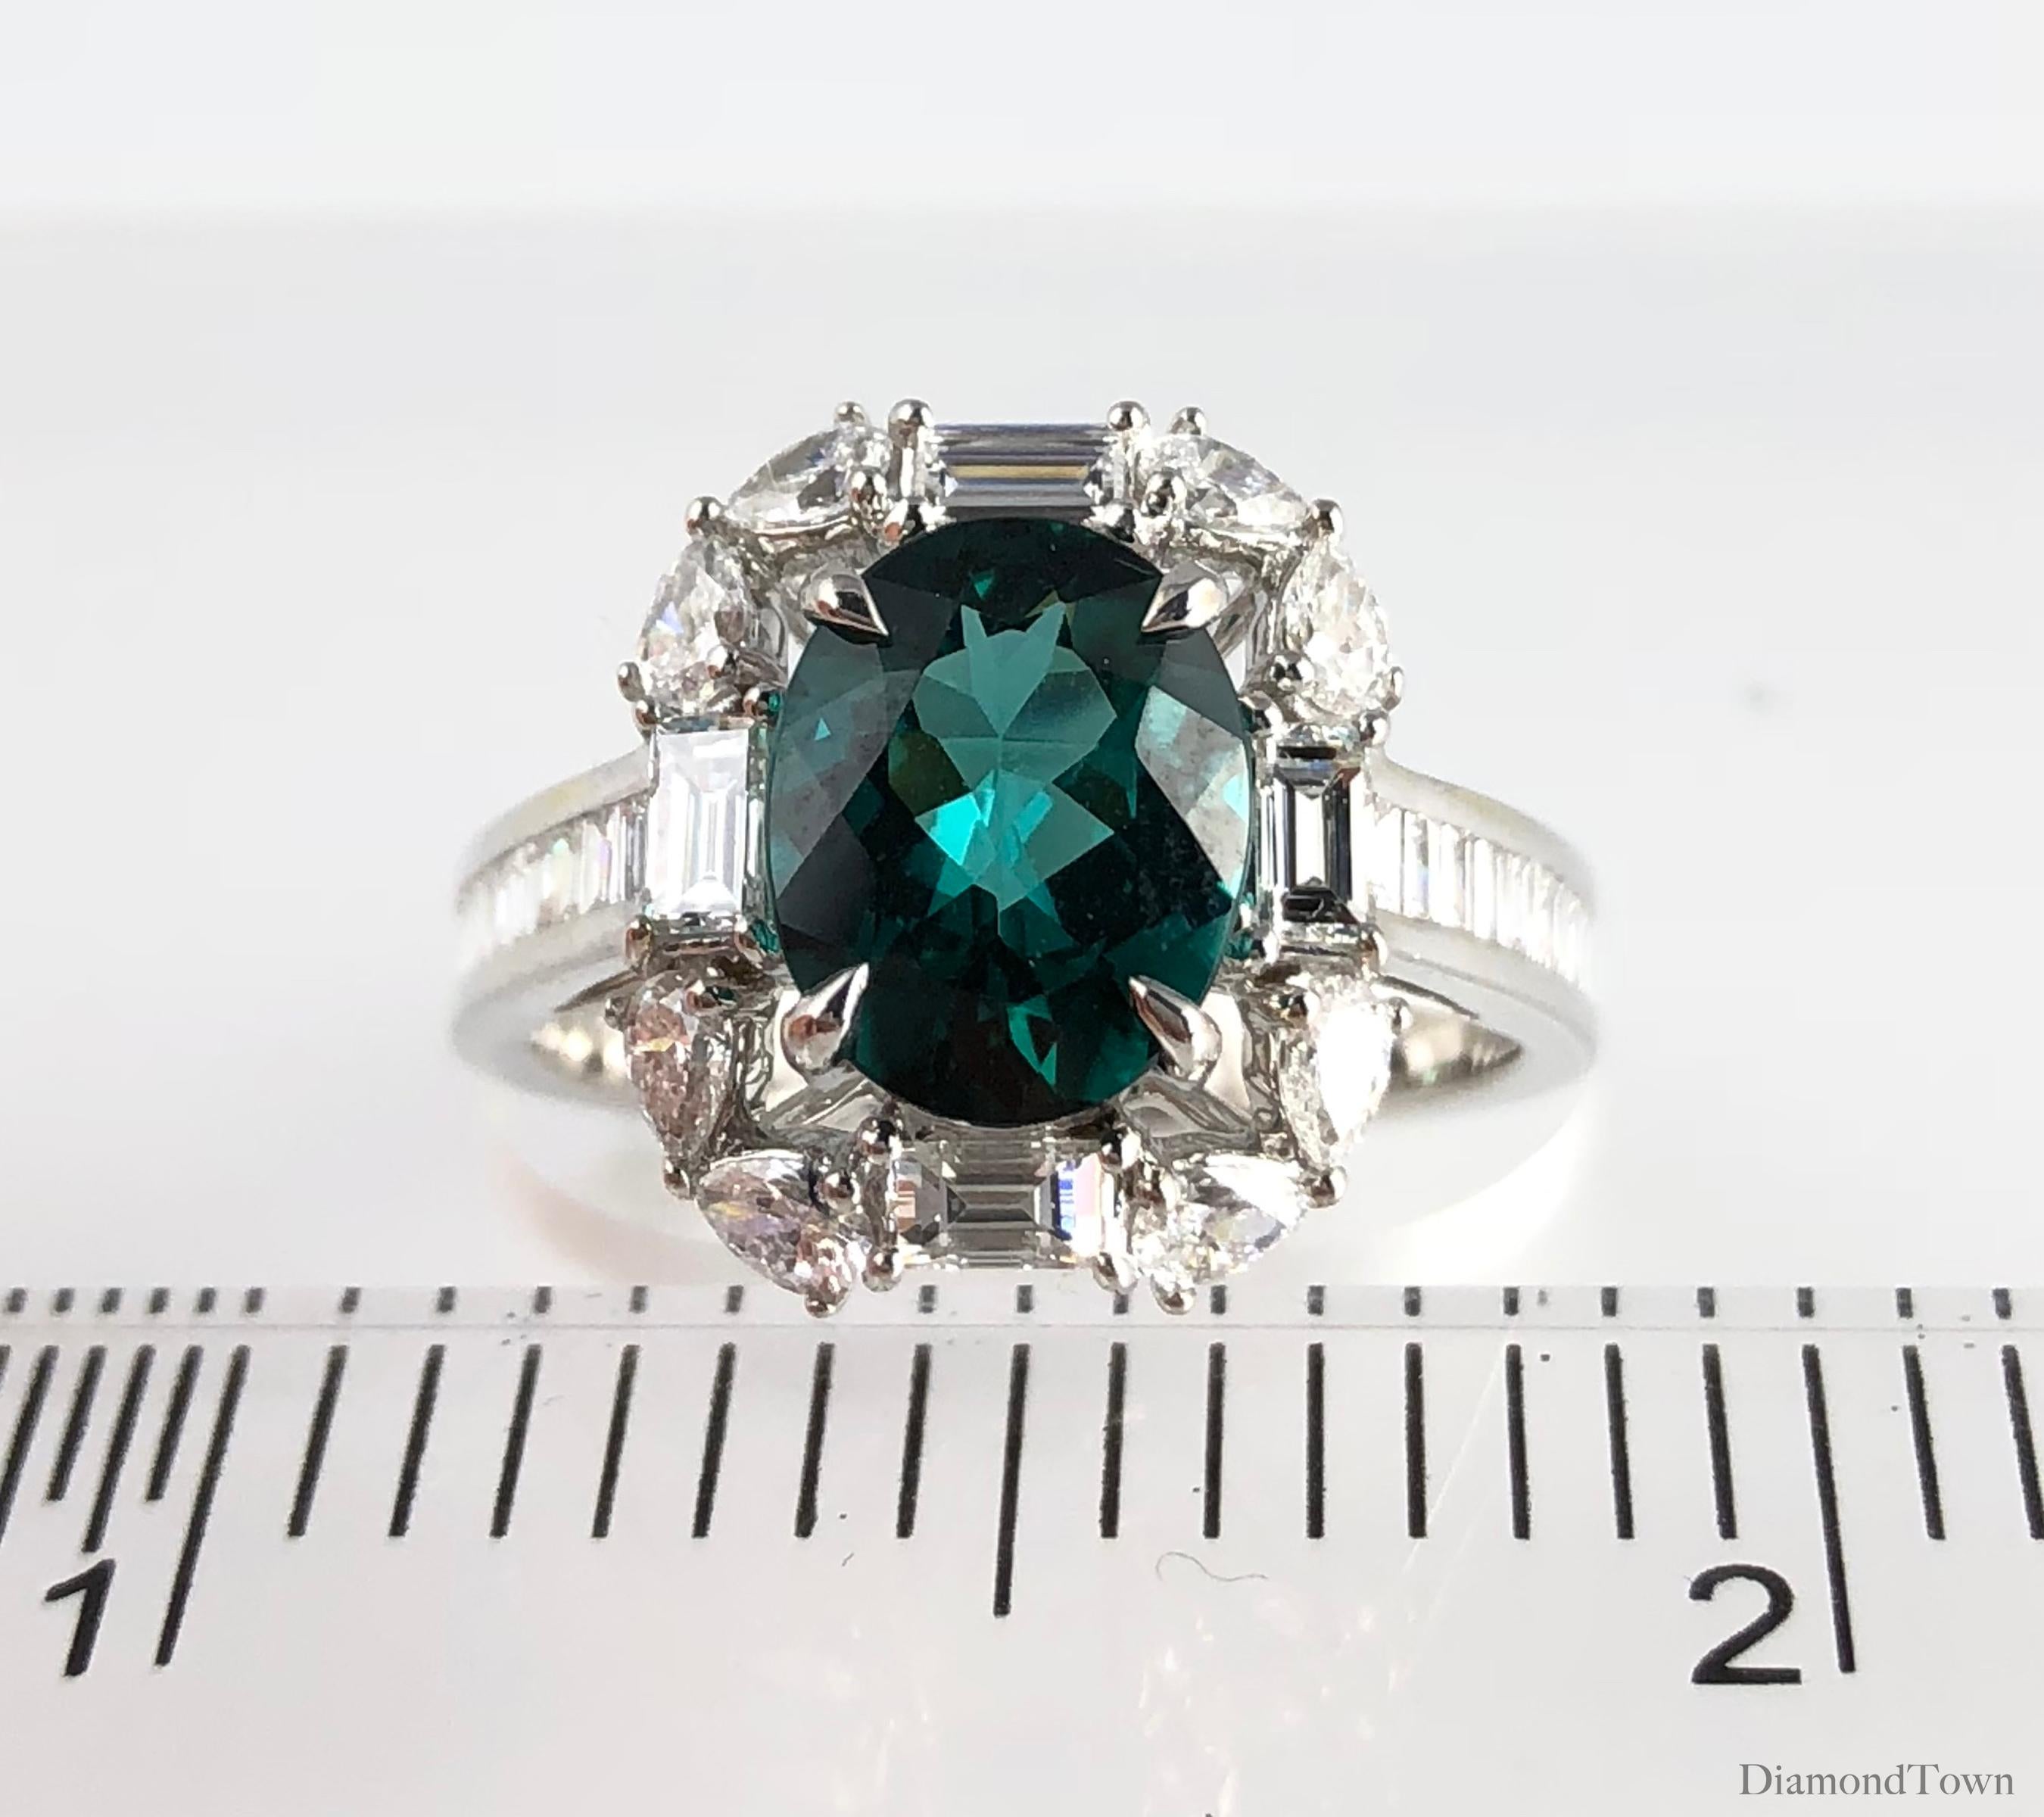 Oval Cut Diamond Town 1.84 Carat Exotic Green Tourmaline and Diamond Cluster Ring